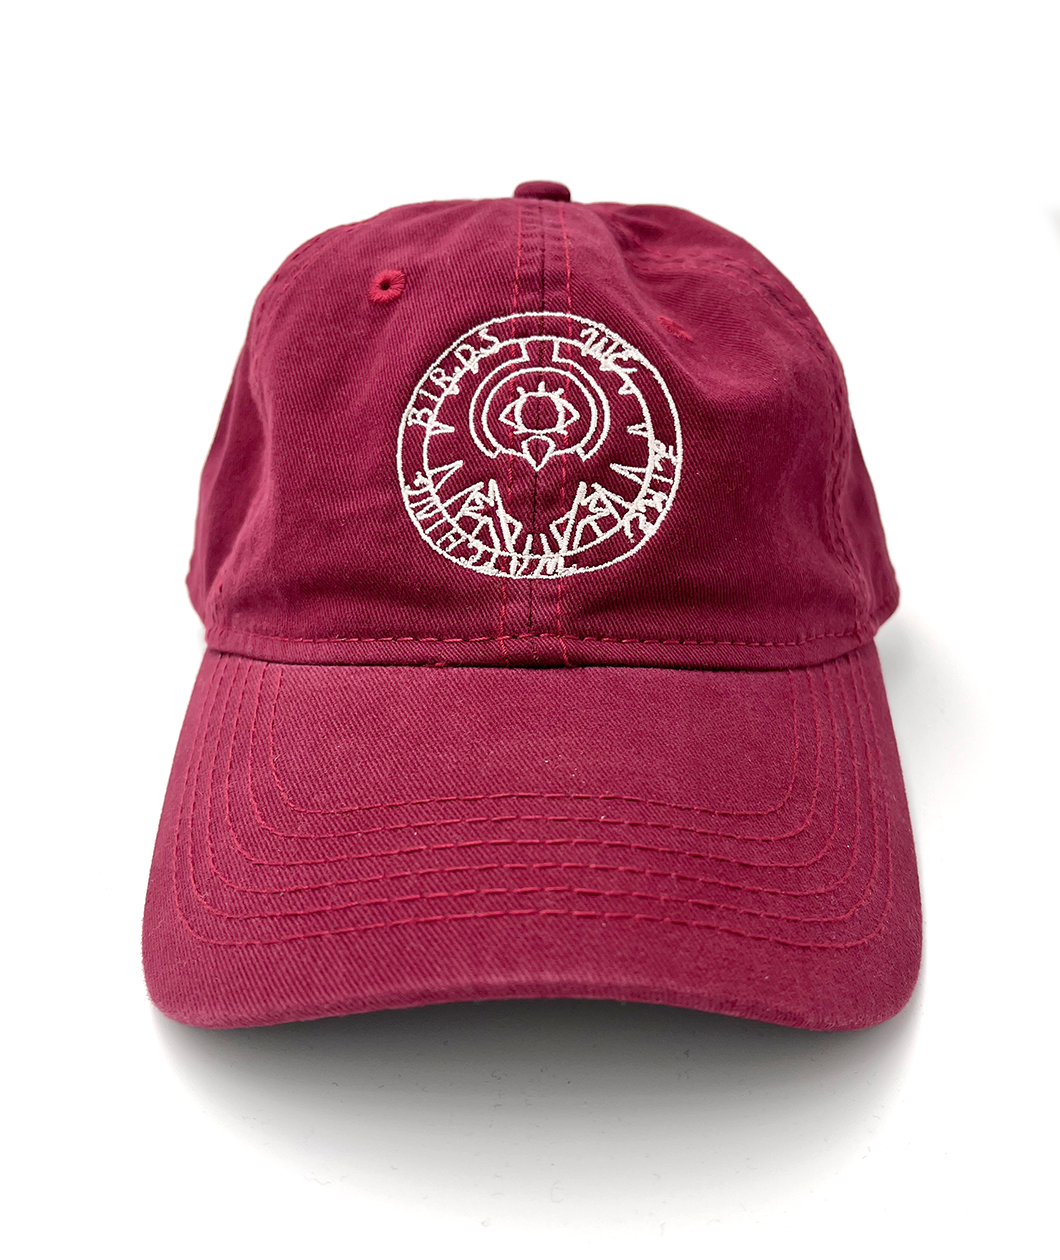 A maroon/red baseball cap with an embroidered circle design on the front in white. From Brian David Gilbert.